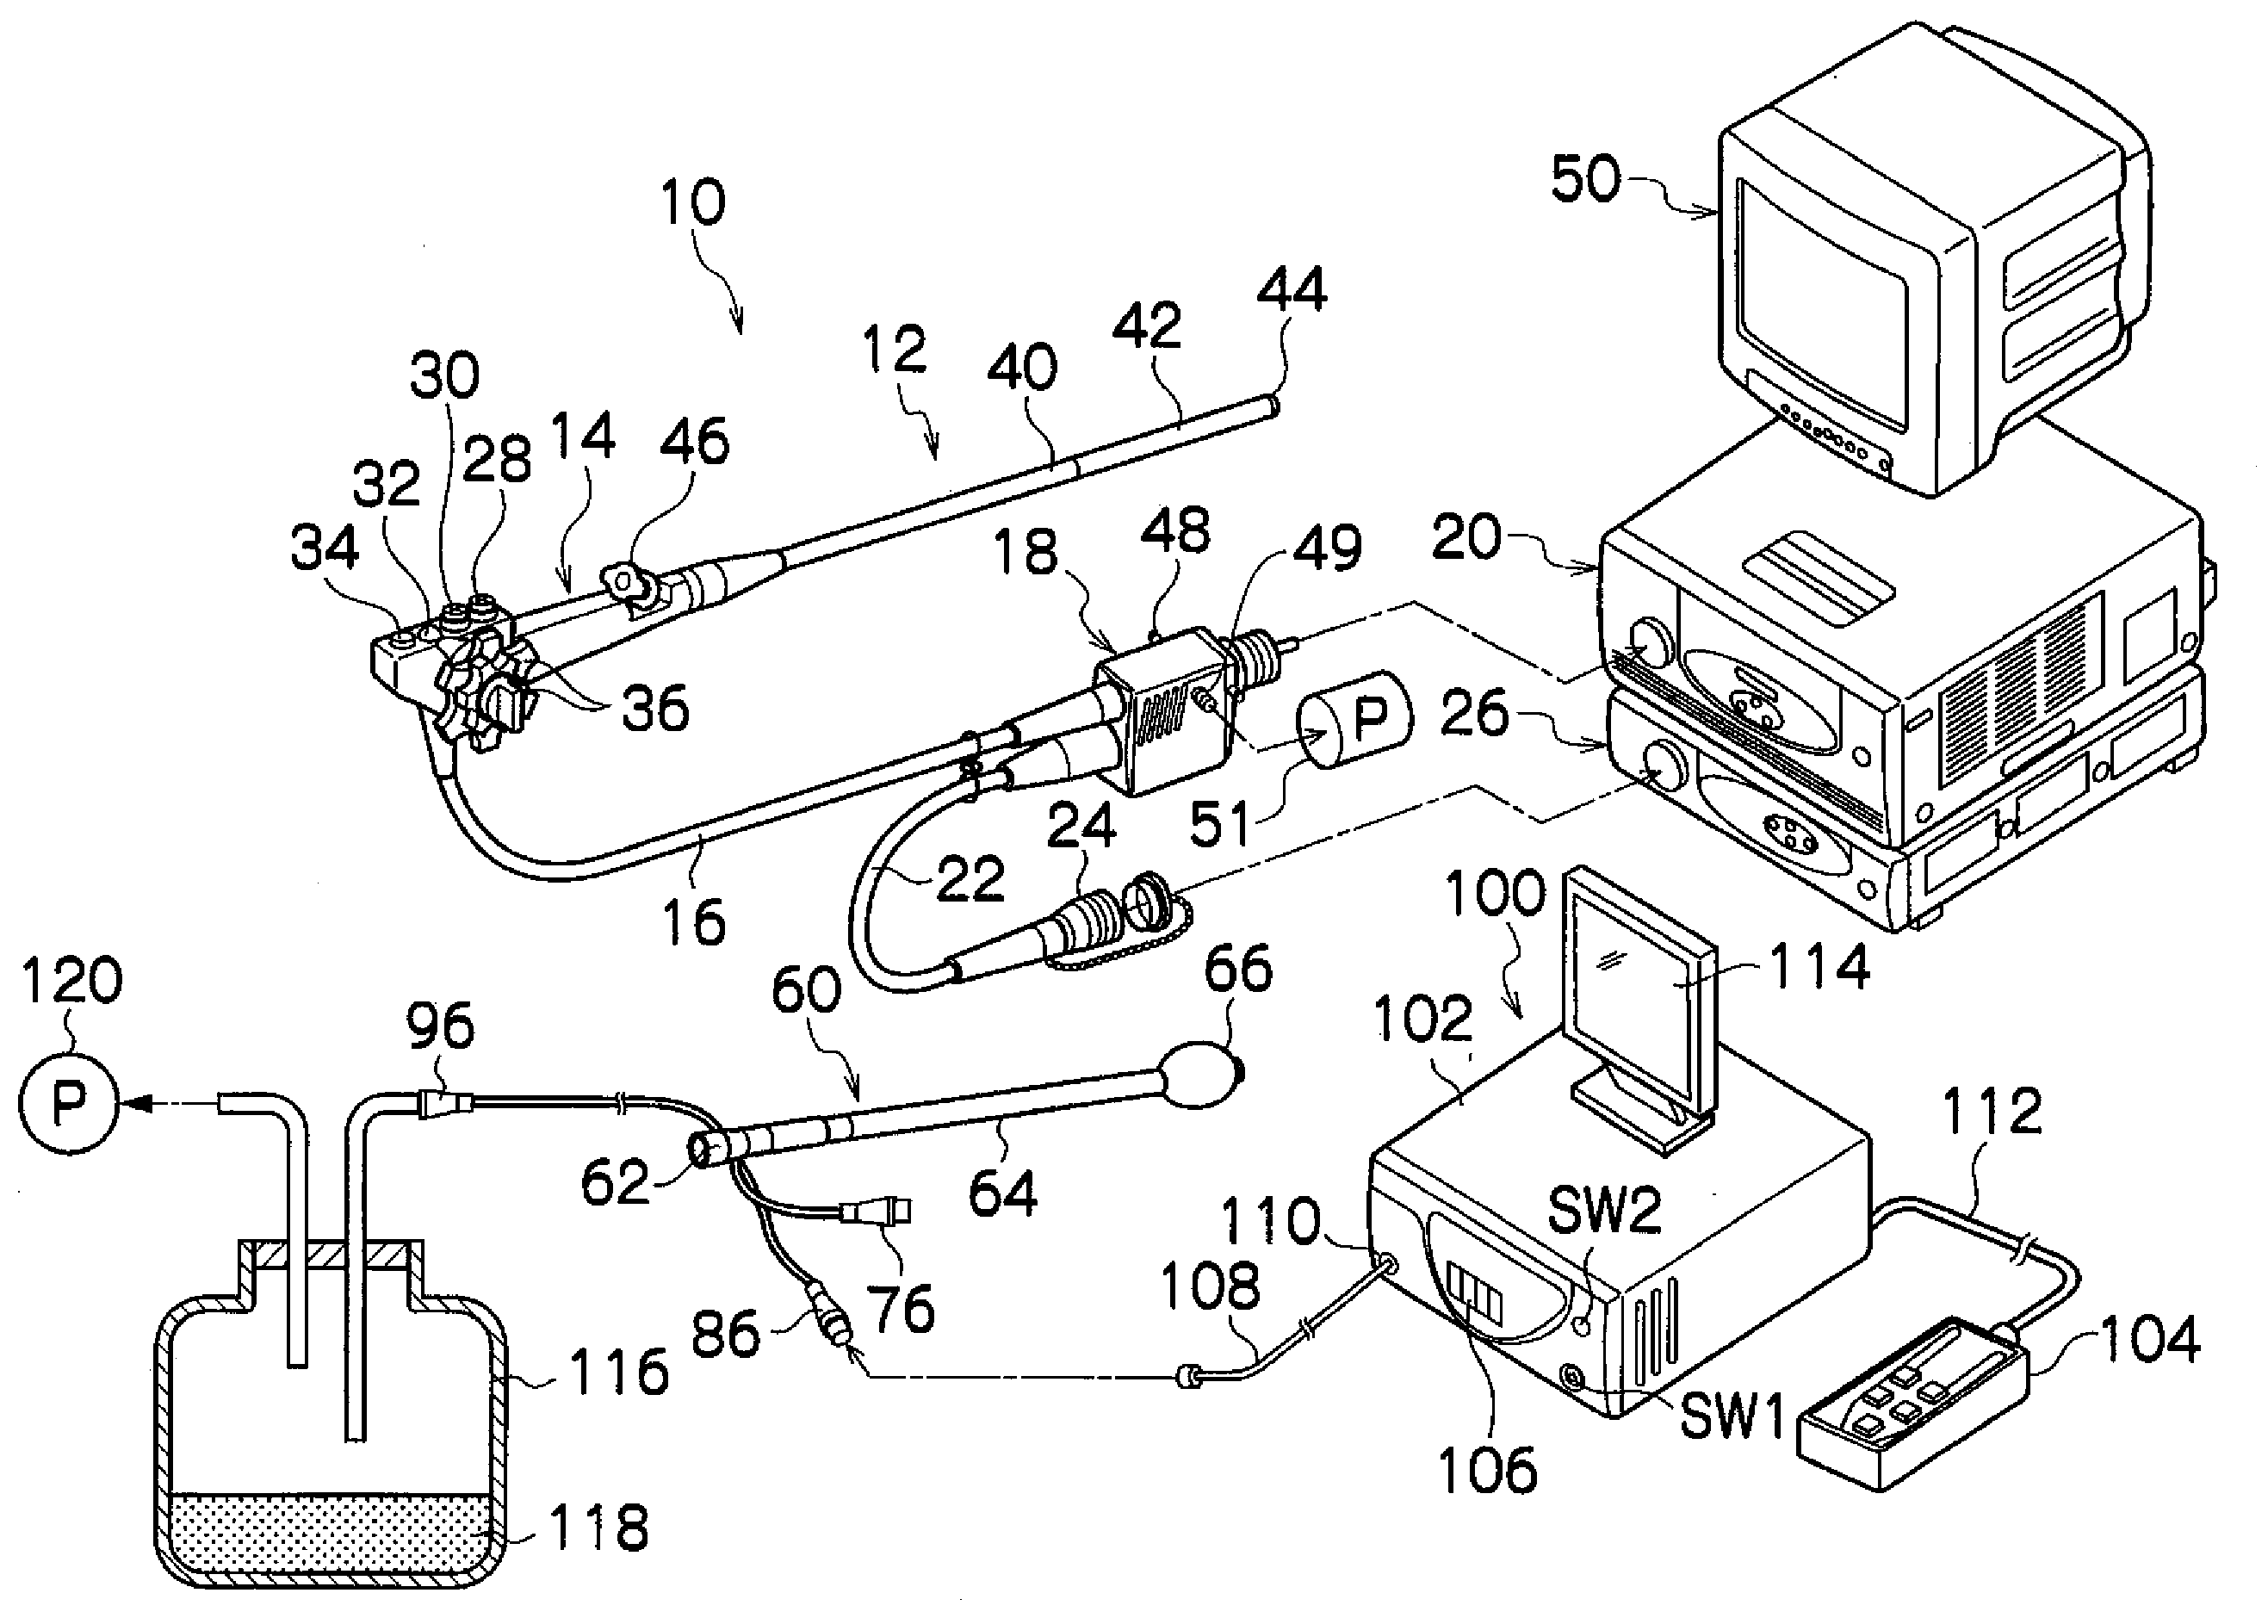 Insertion assisting device and endoscope apparatus